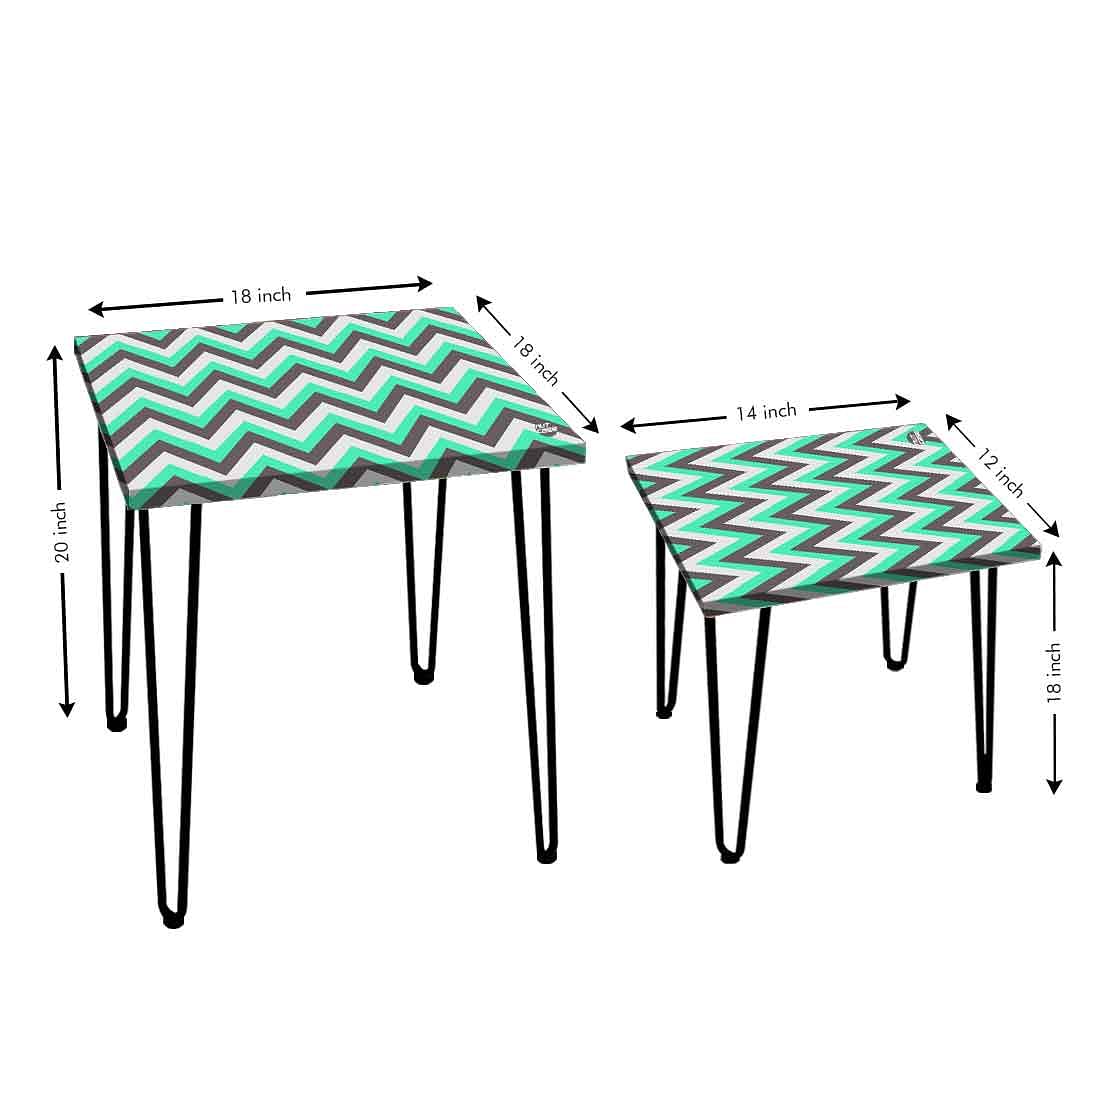 Corner Nest of Tables Set of 2 With Printed Mint And Gray Chevron on Top Online Nutcase